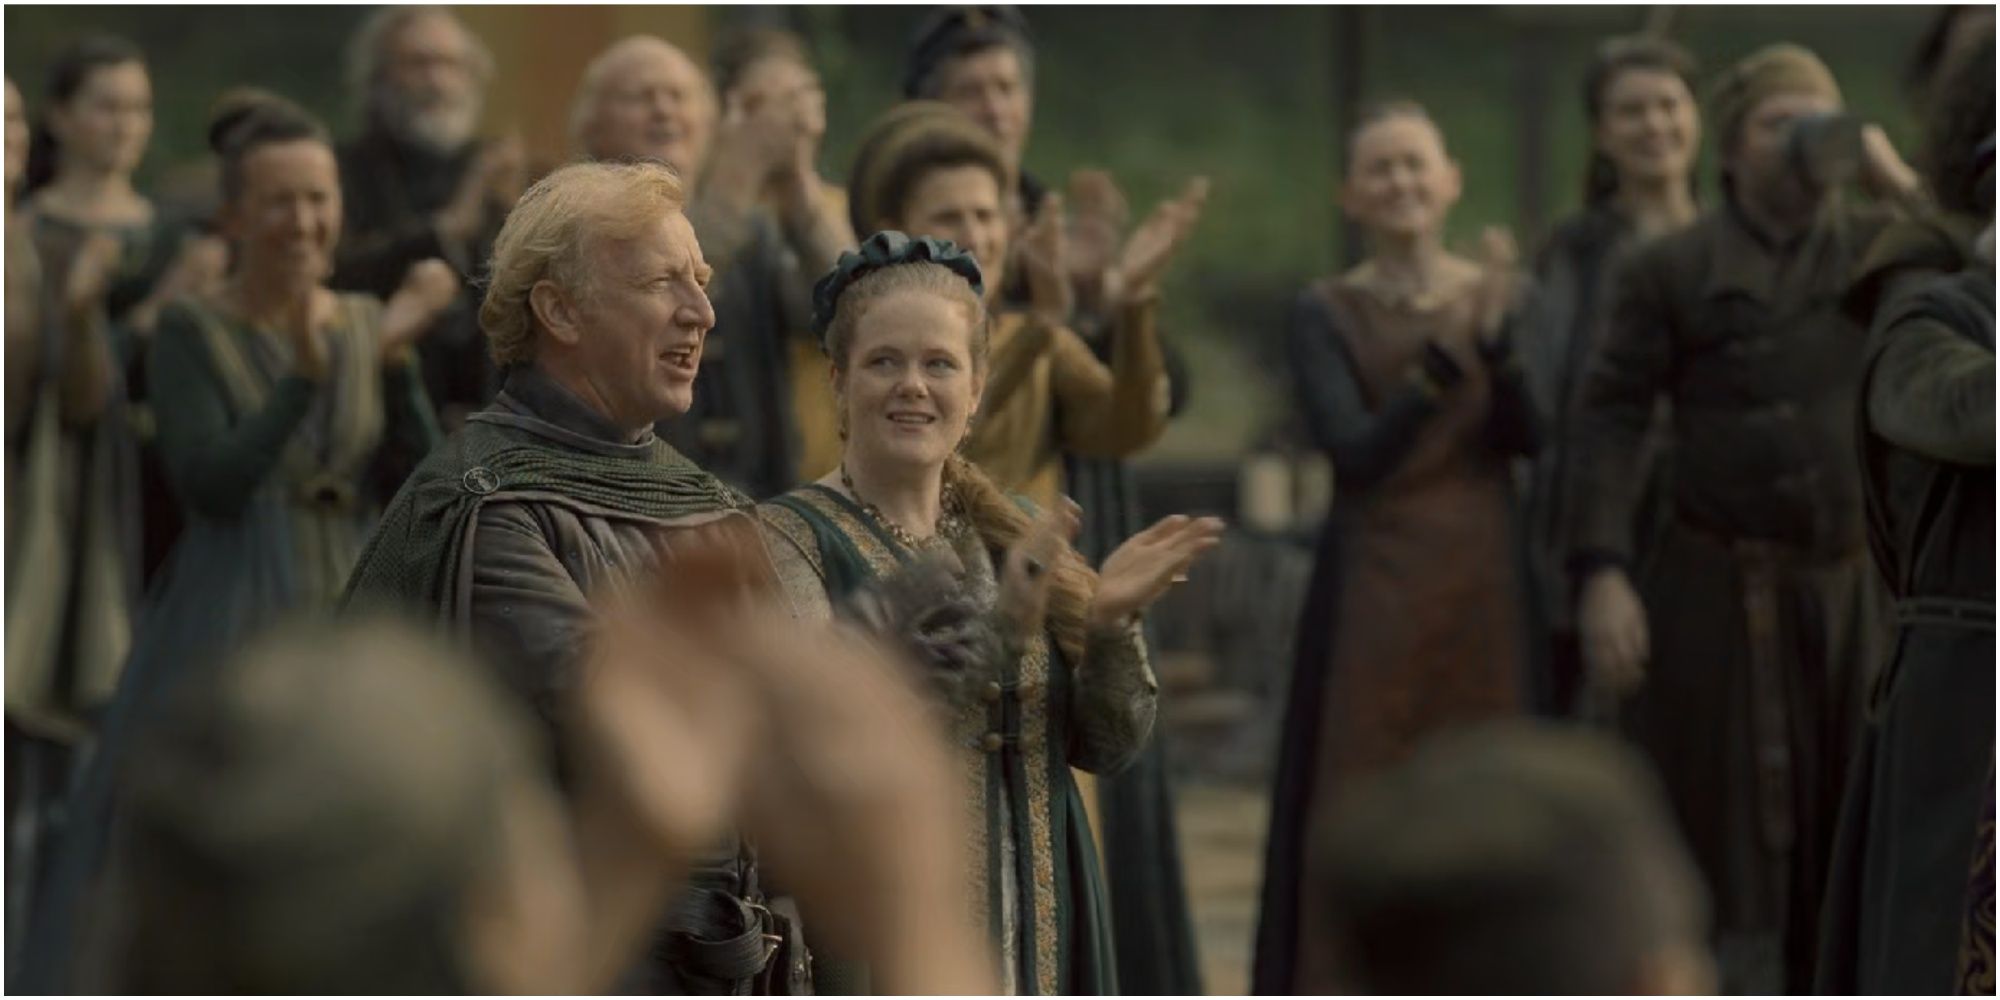 Hobert Hightower clapping for Aegon in House of the Dragon.